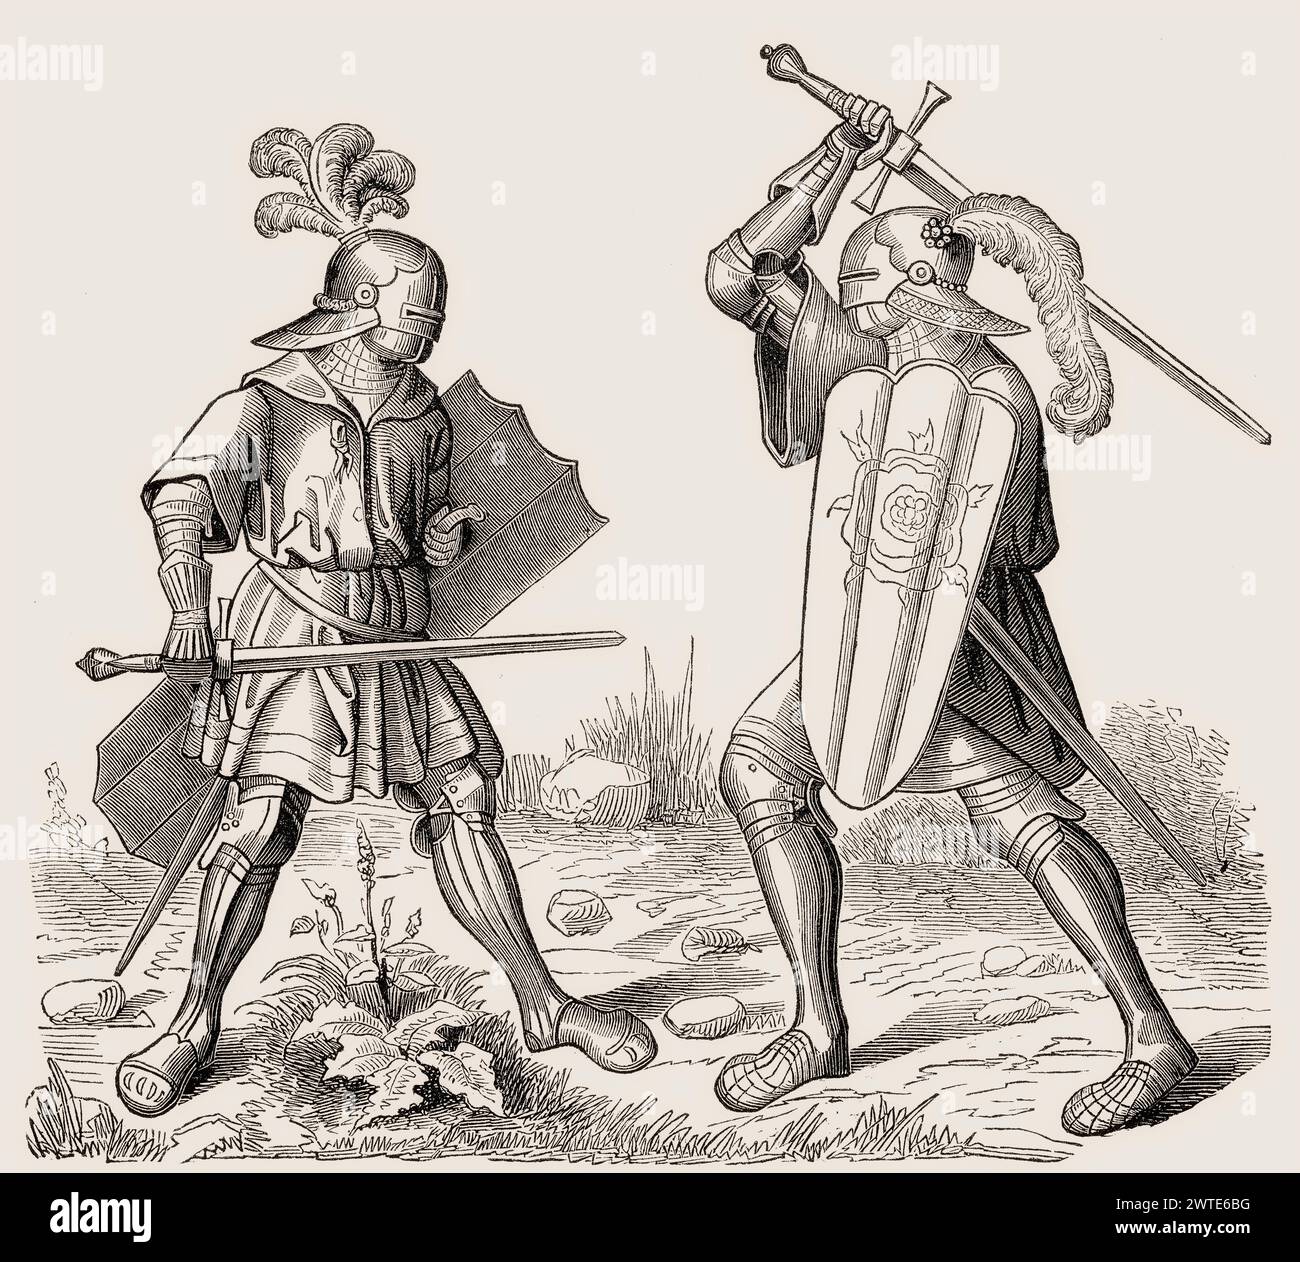 A single combat, fighting knights in armour, 15th century Stock Photo